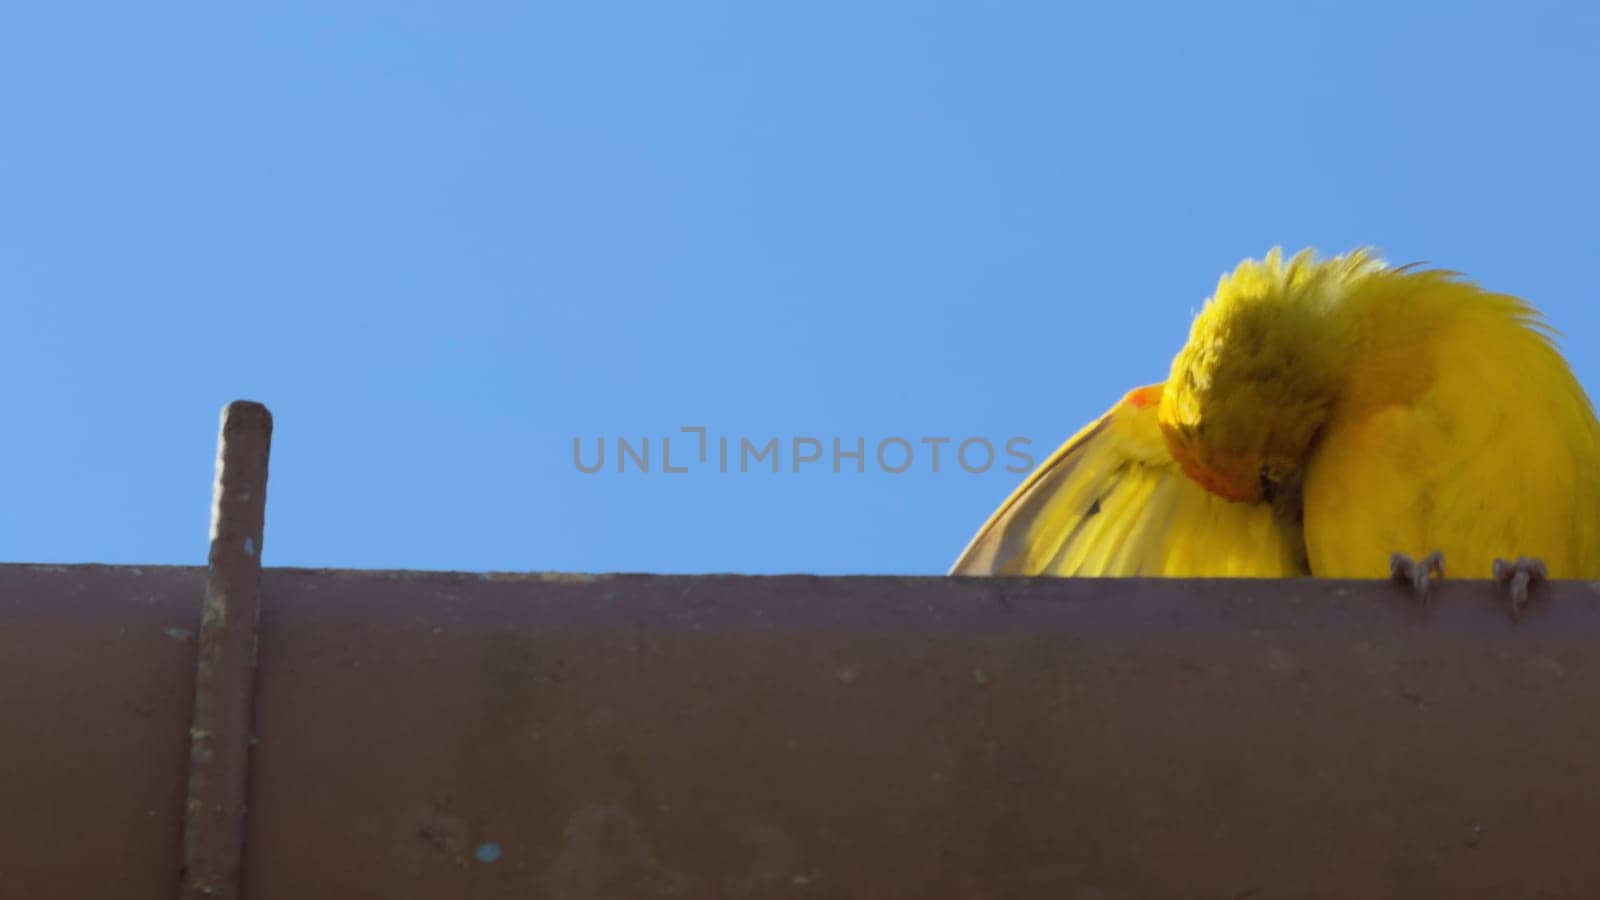 Small yellow bird preens on a roof against a clear blue sky, ideal for overlaying text.